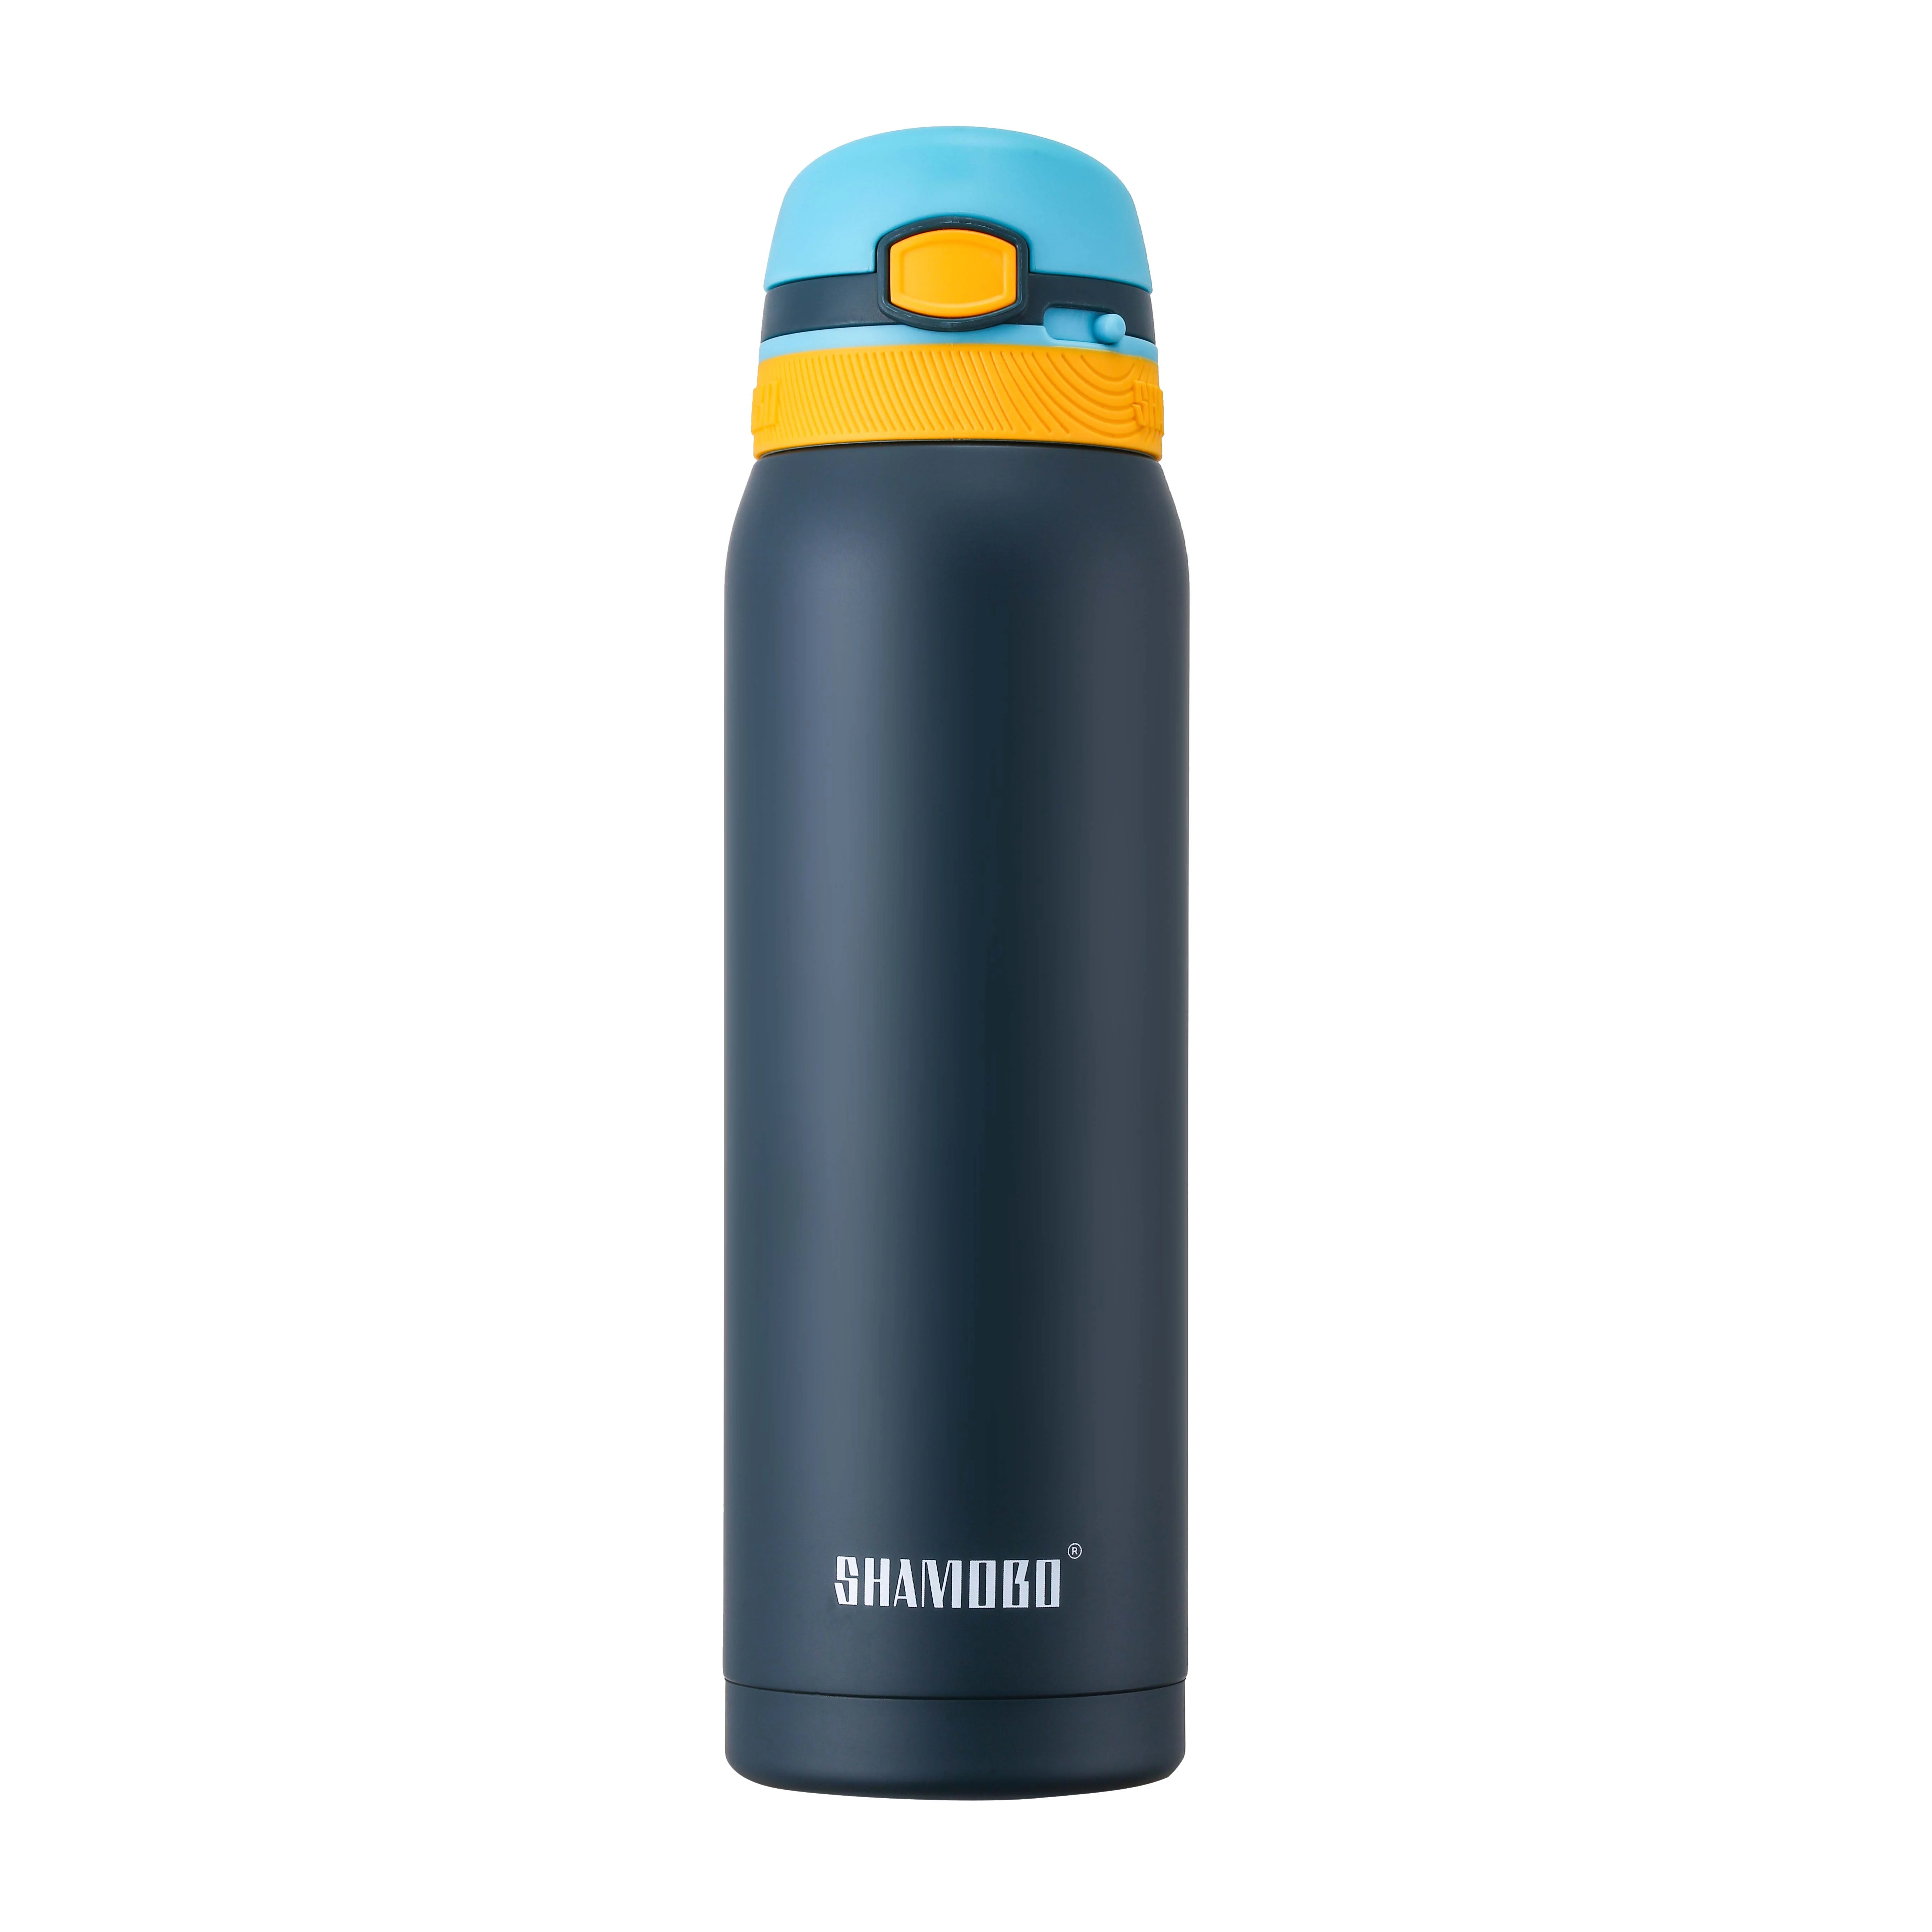 Sell Well custom keep hot eco friendly water bottle stainless steel thermal triple insulated flask vacuum